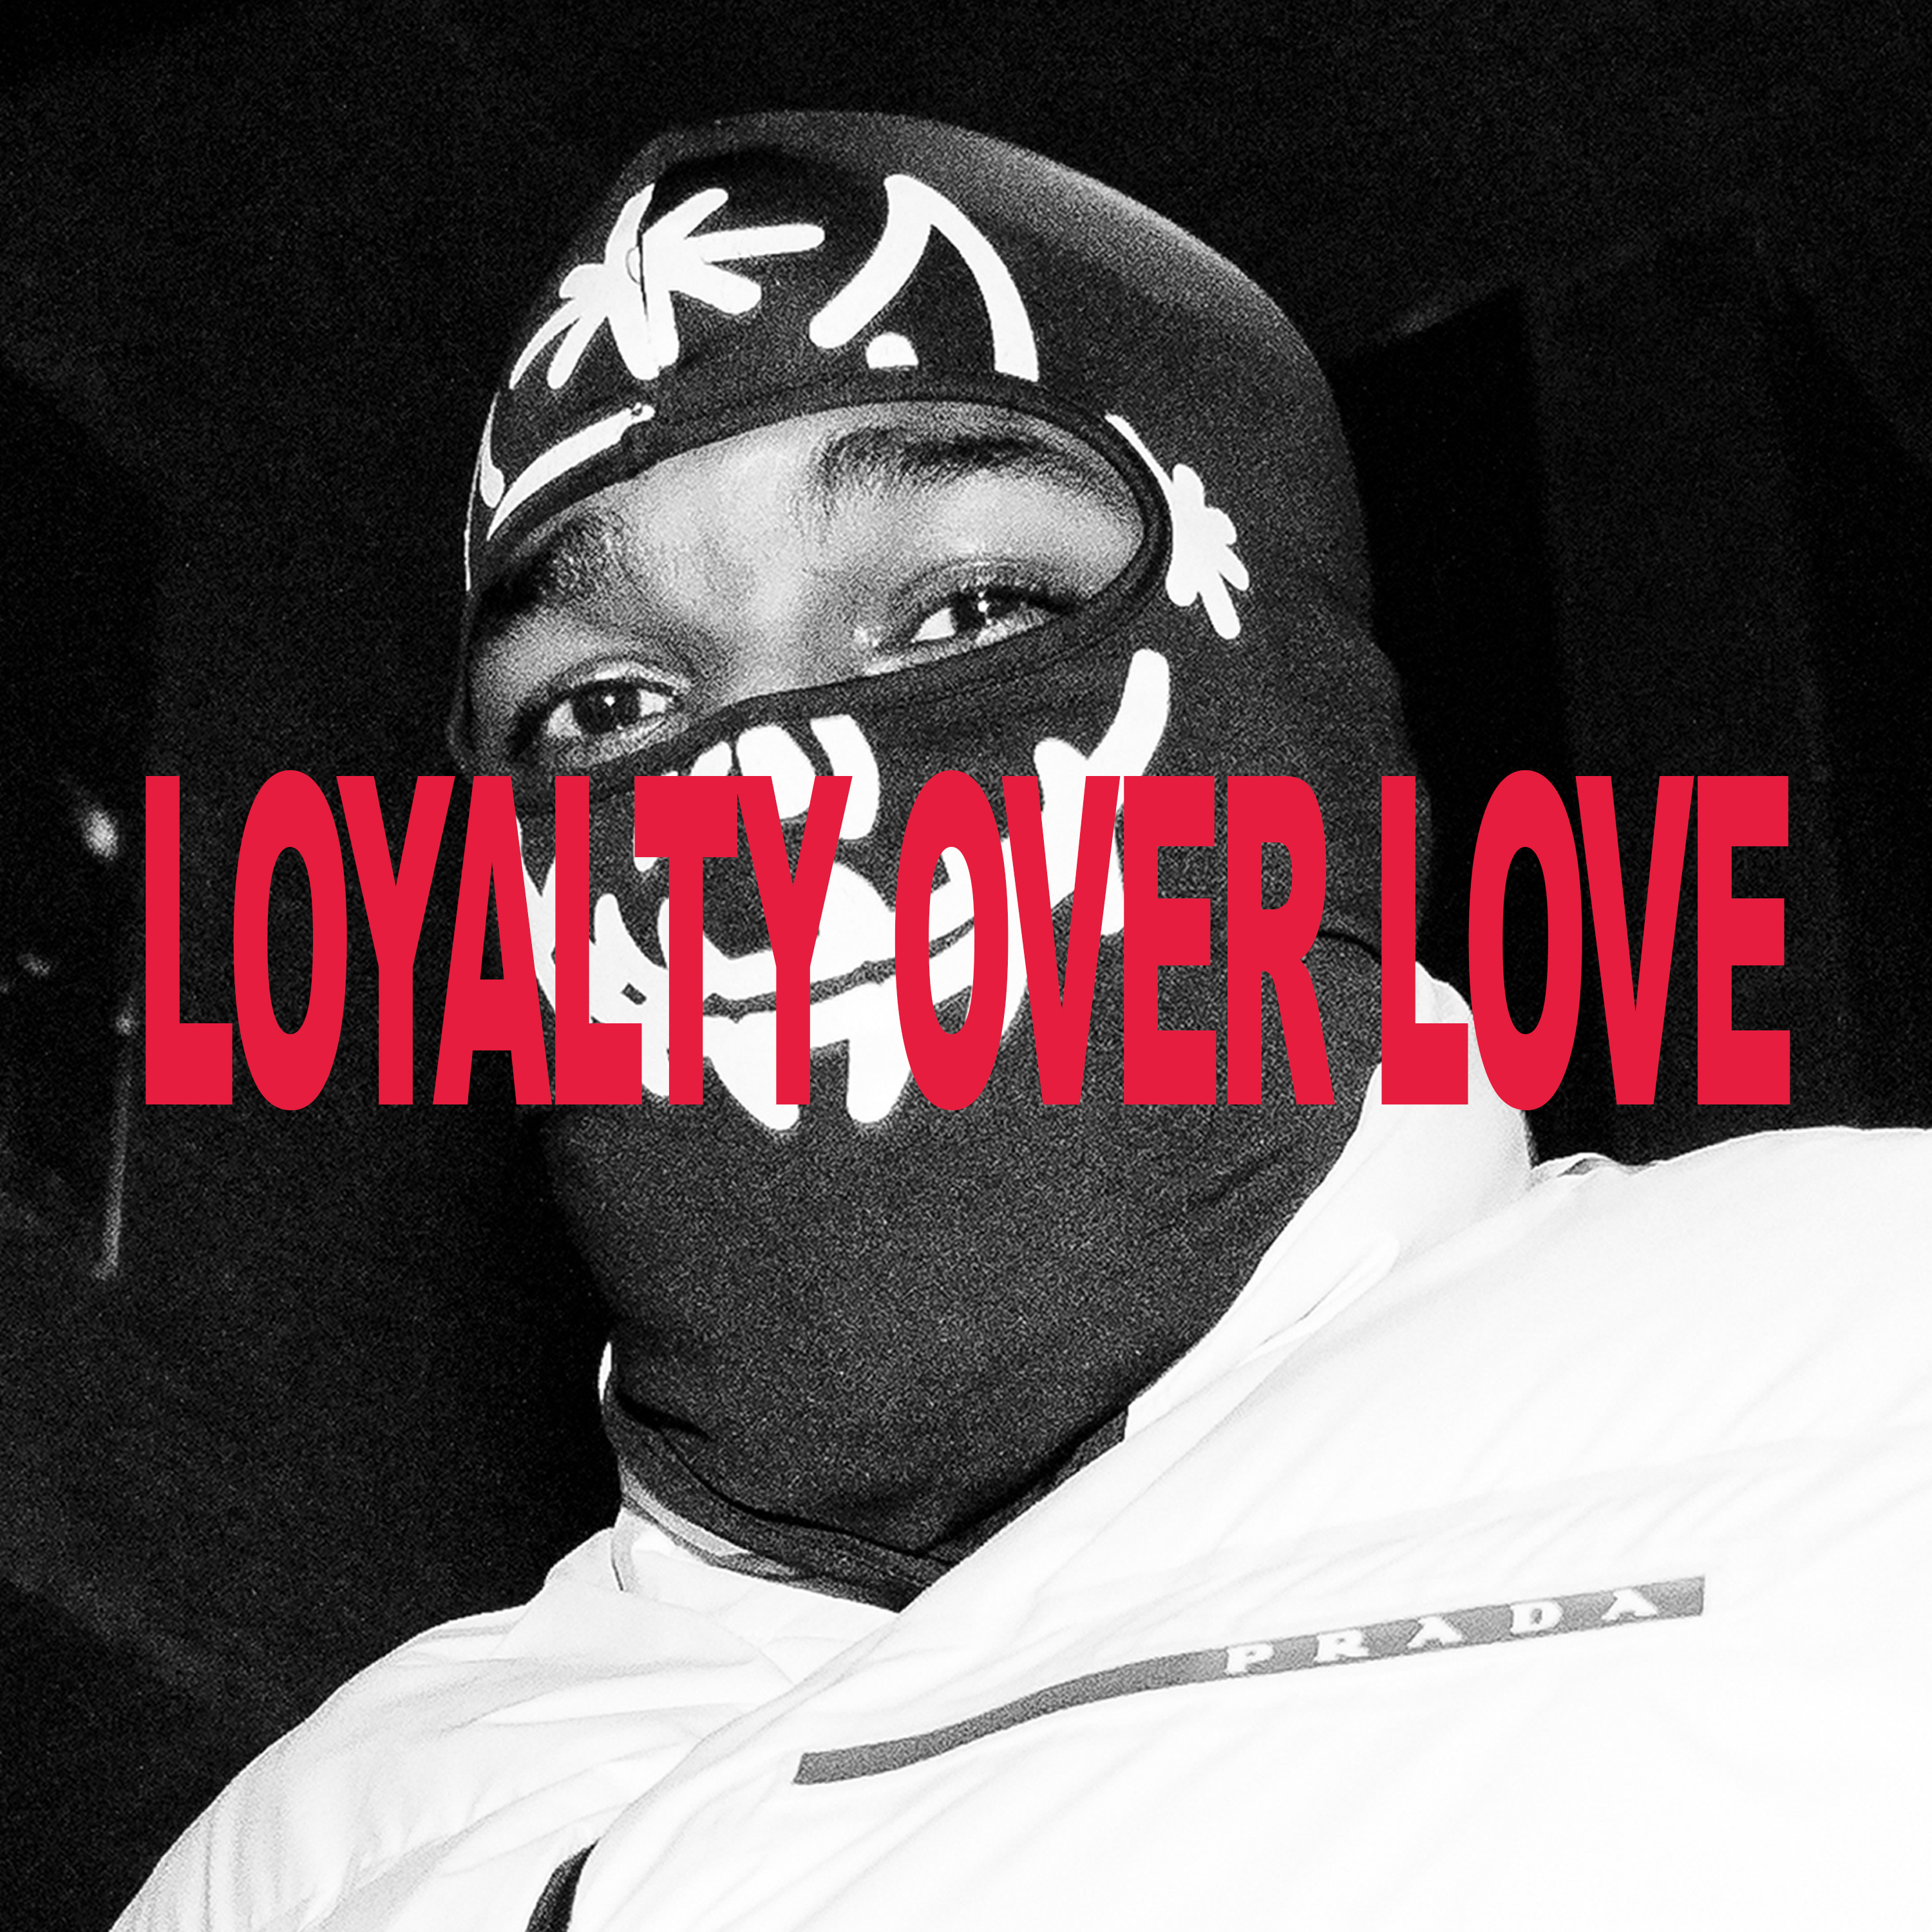 reezy
‘LOYALTY OVER LOVE’
